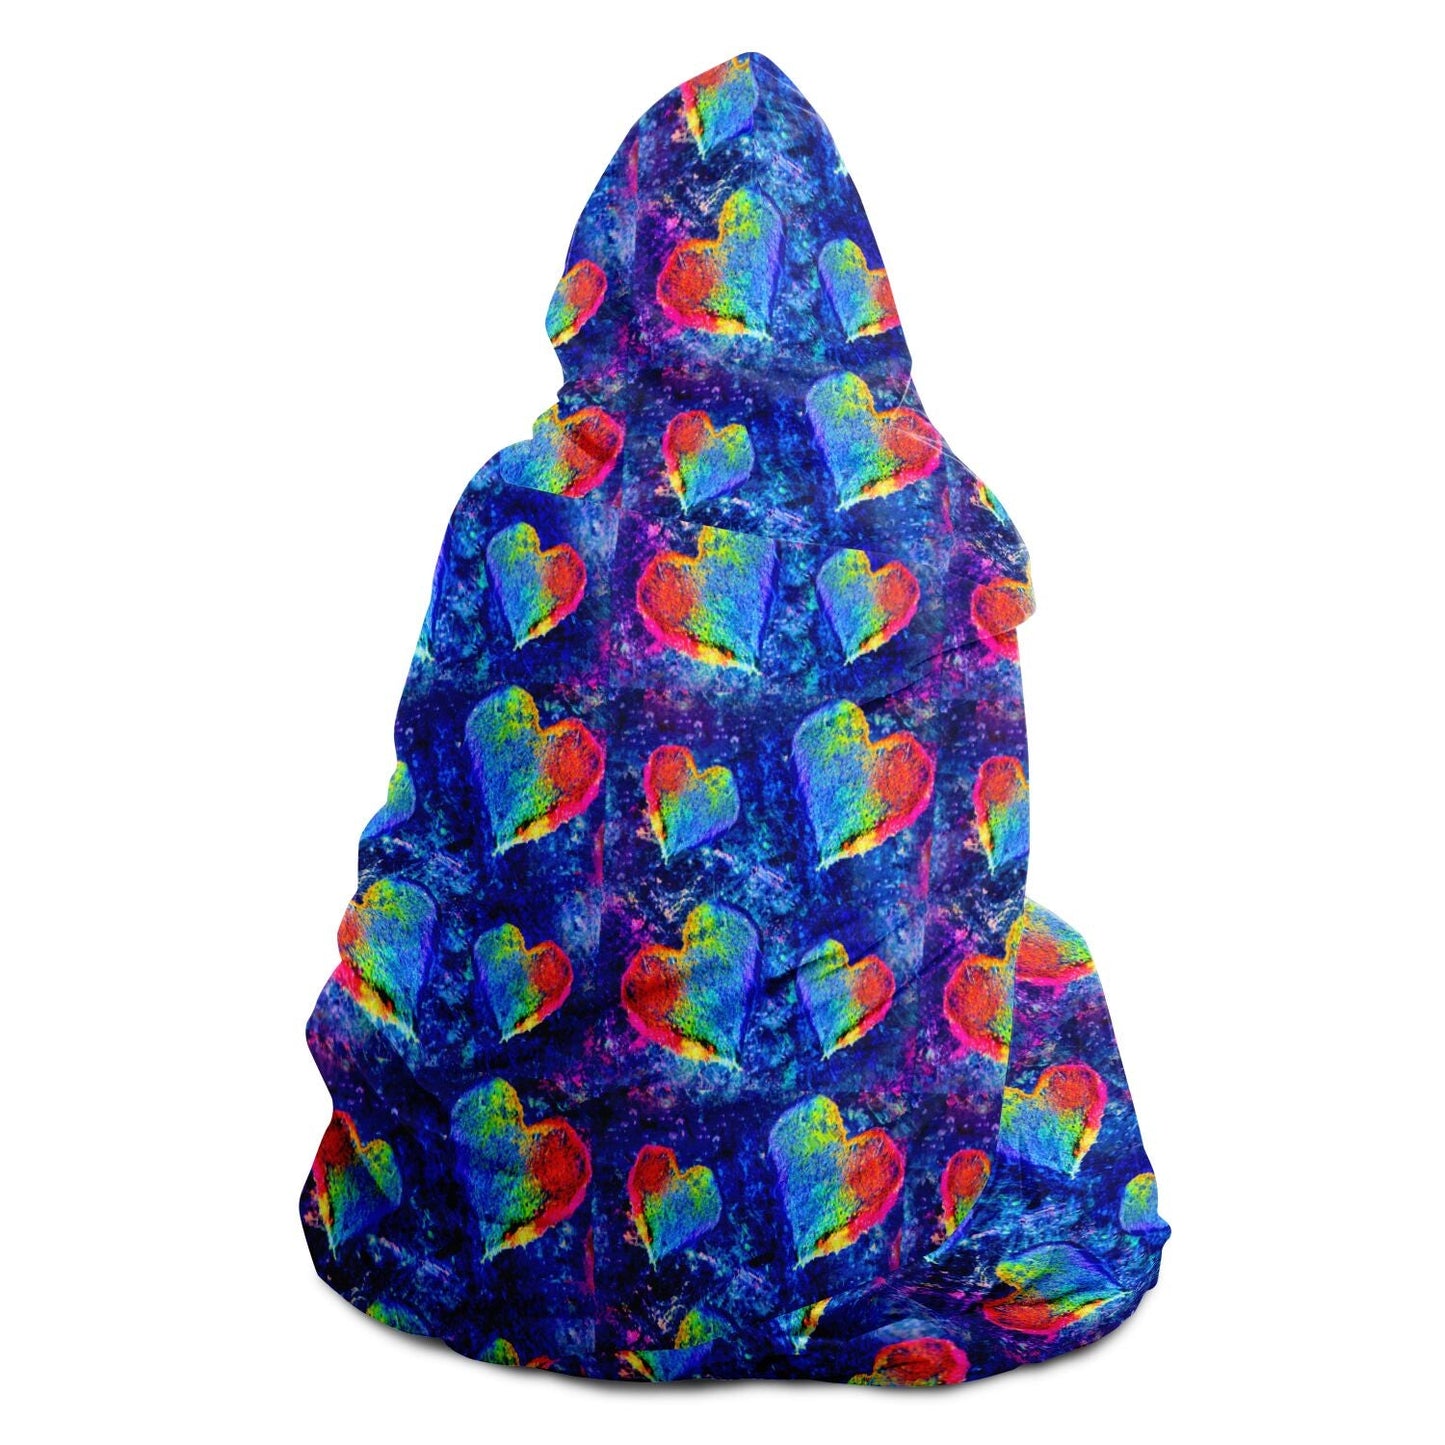 Glitter Hearts Hooded Blanket (Available in Premium Sherpa & Micro Fleece) - The Grateful Hearts